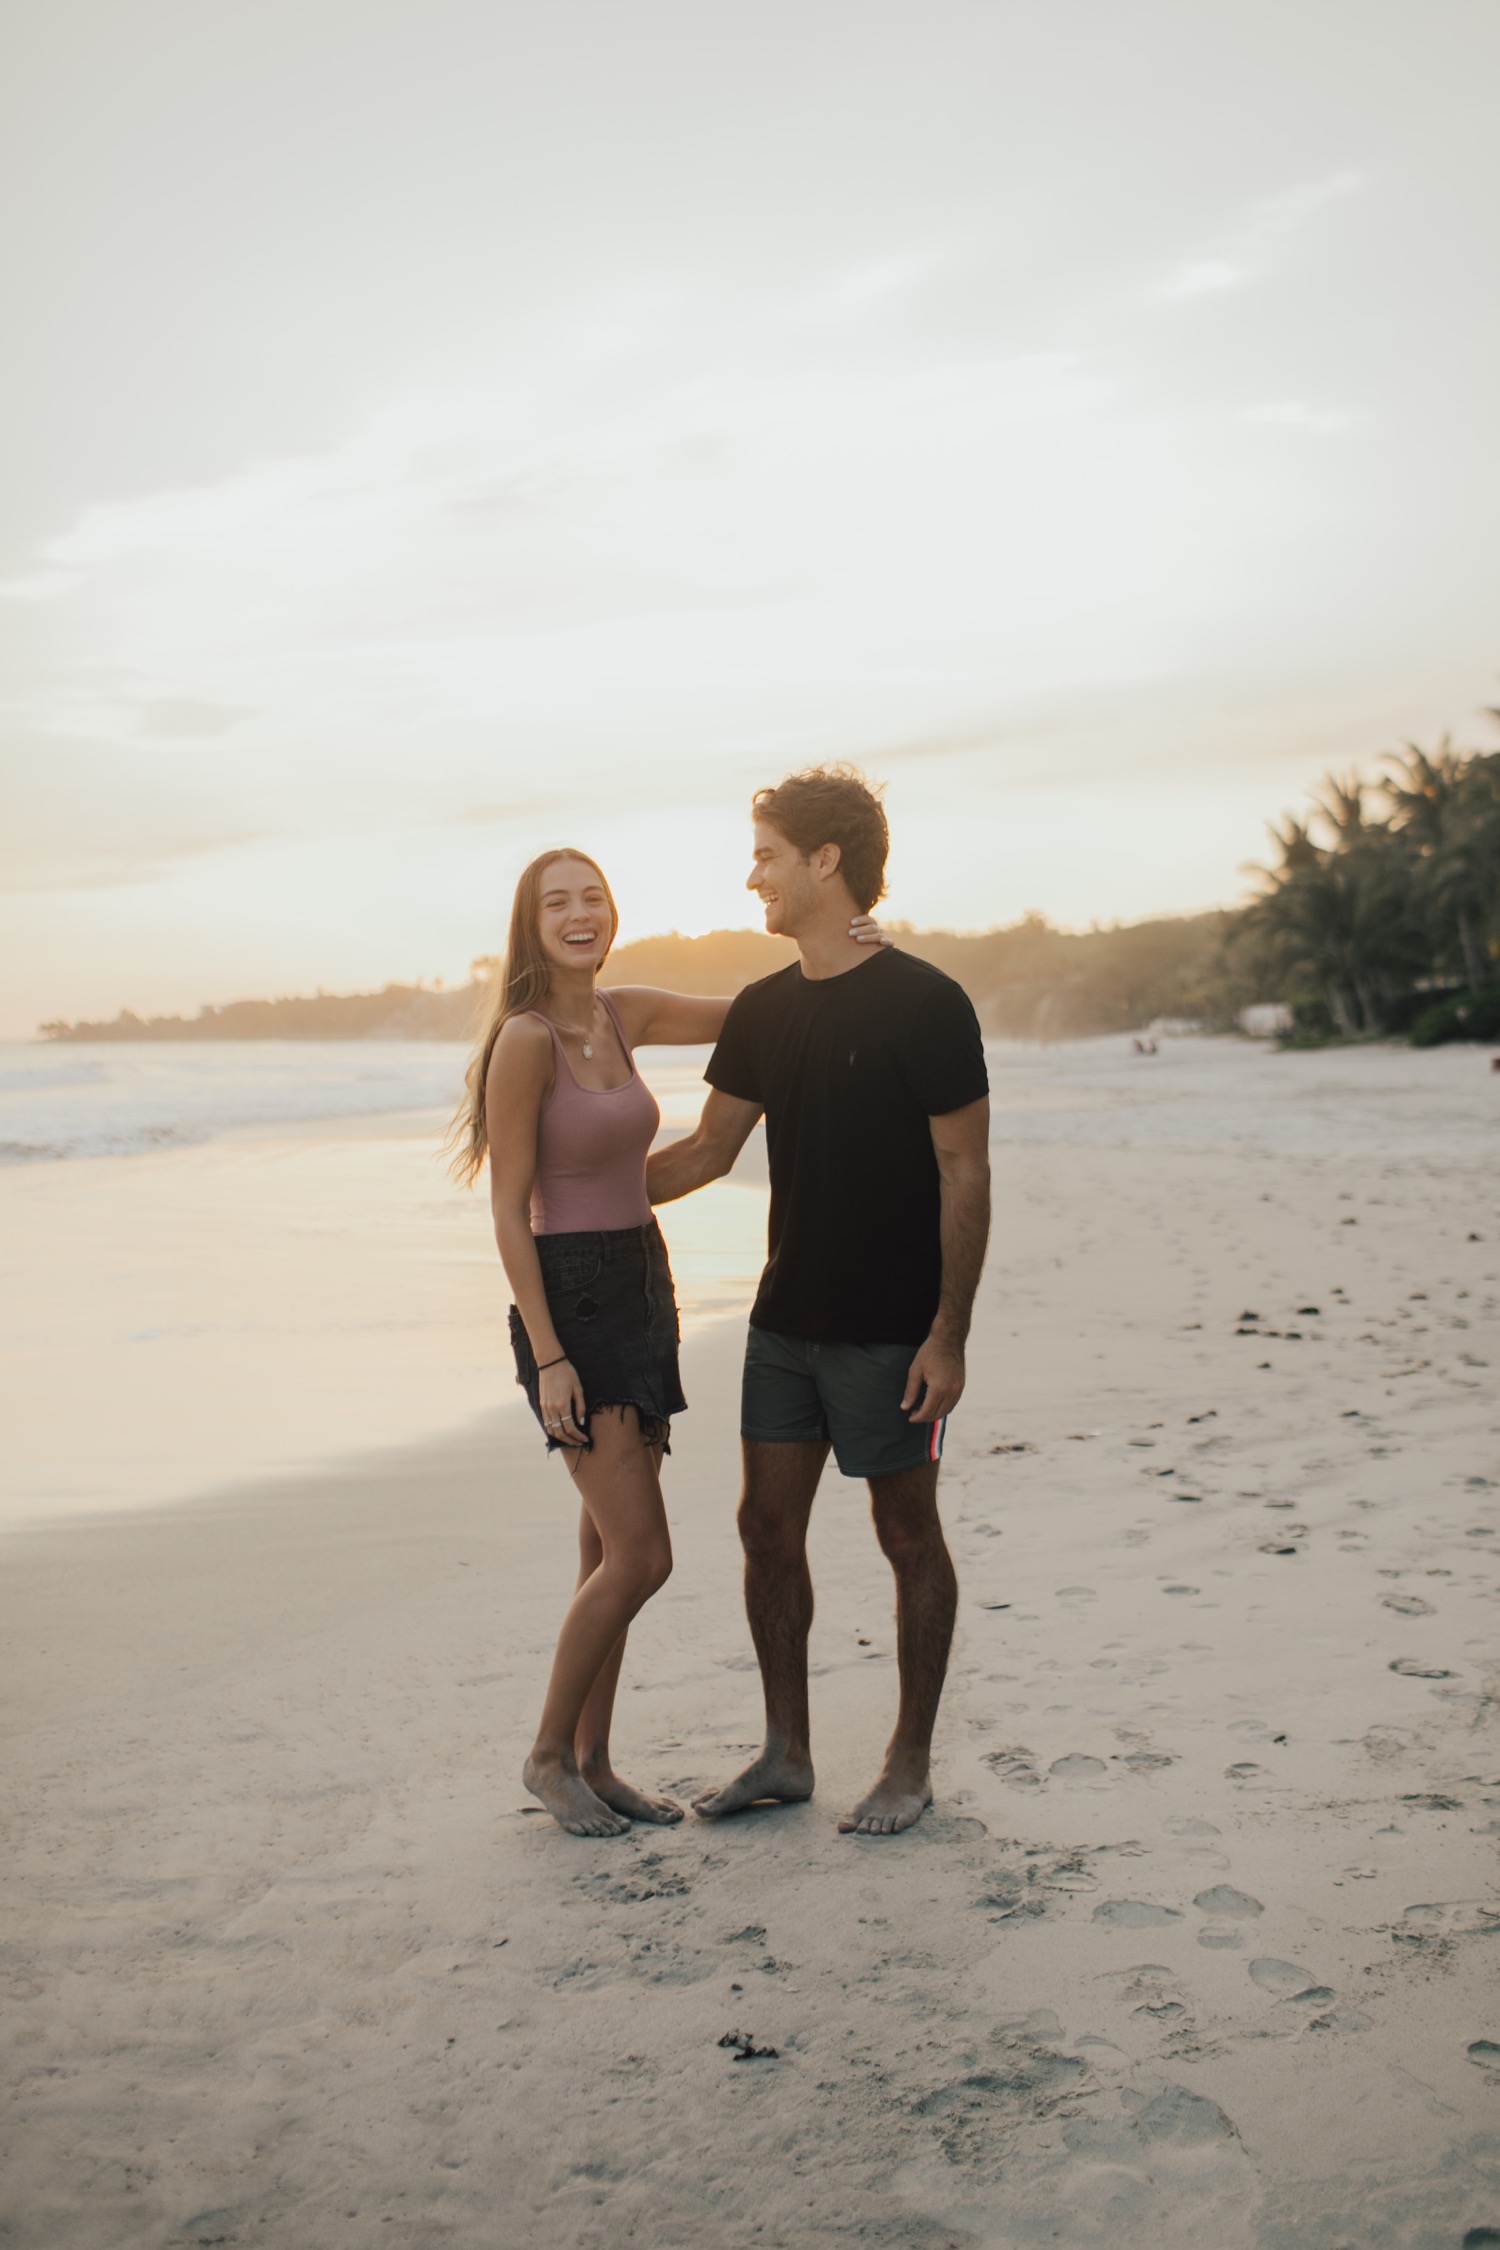 Beach Photoshoot Ideas & What to Wear: 7 Tips From a Pro Photographer